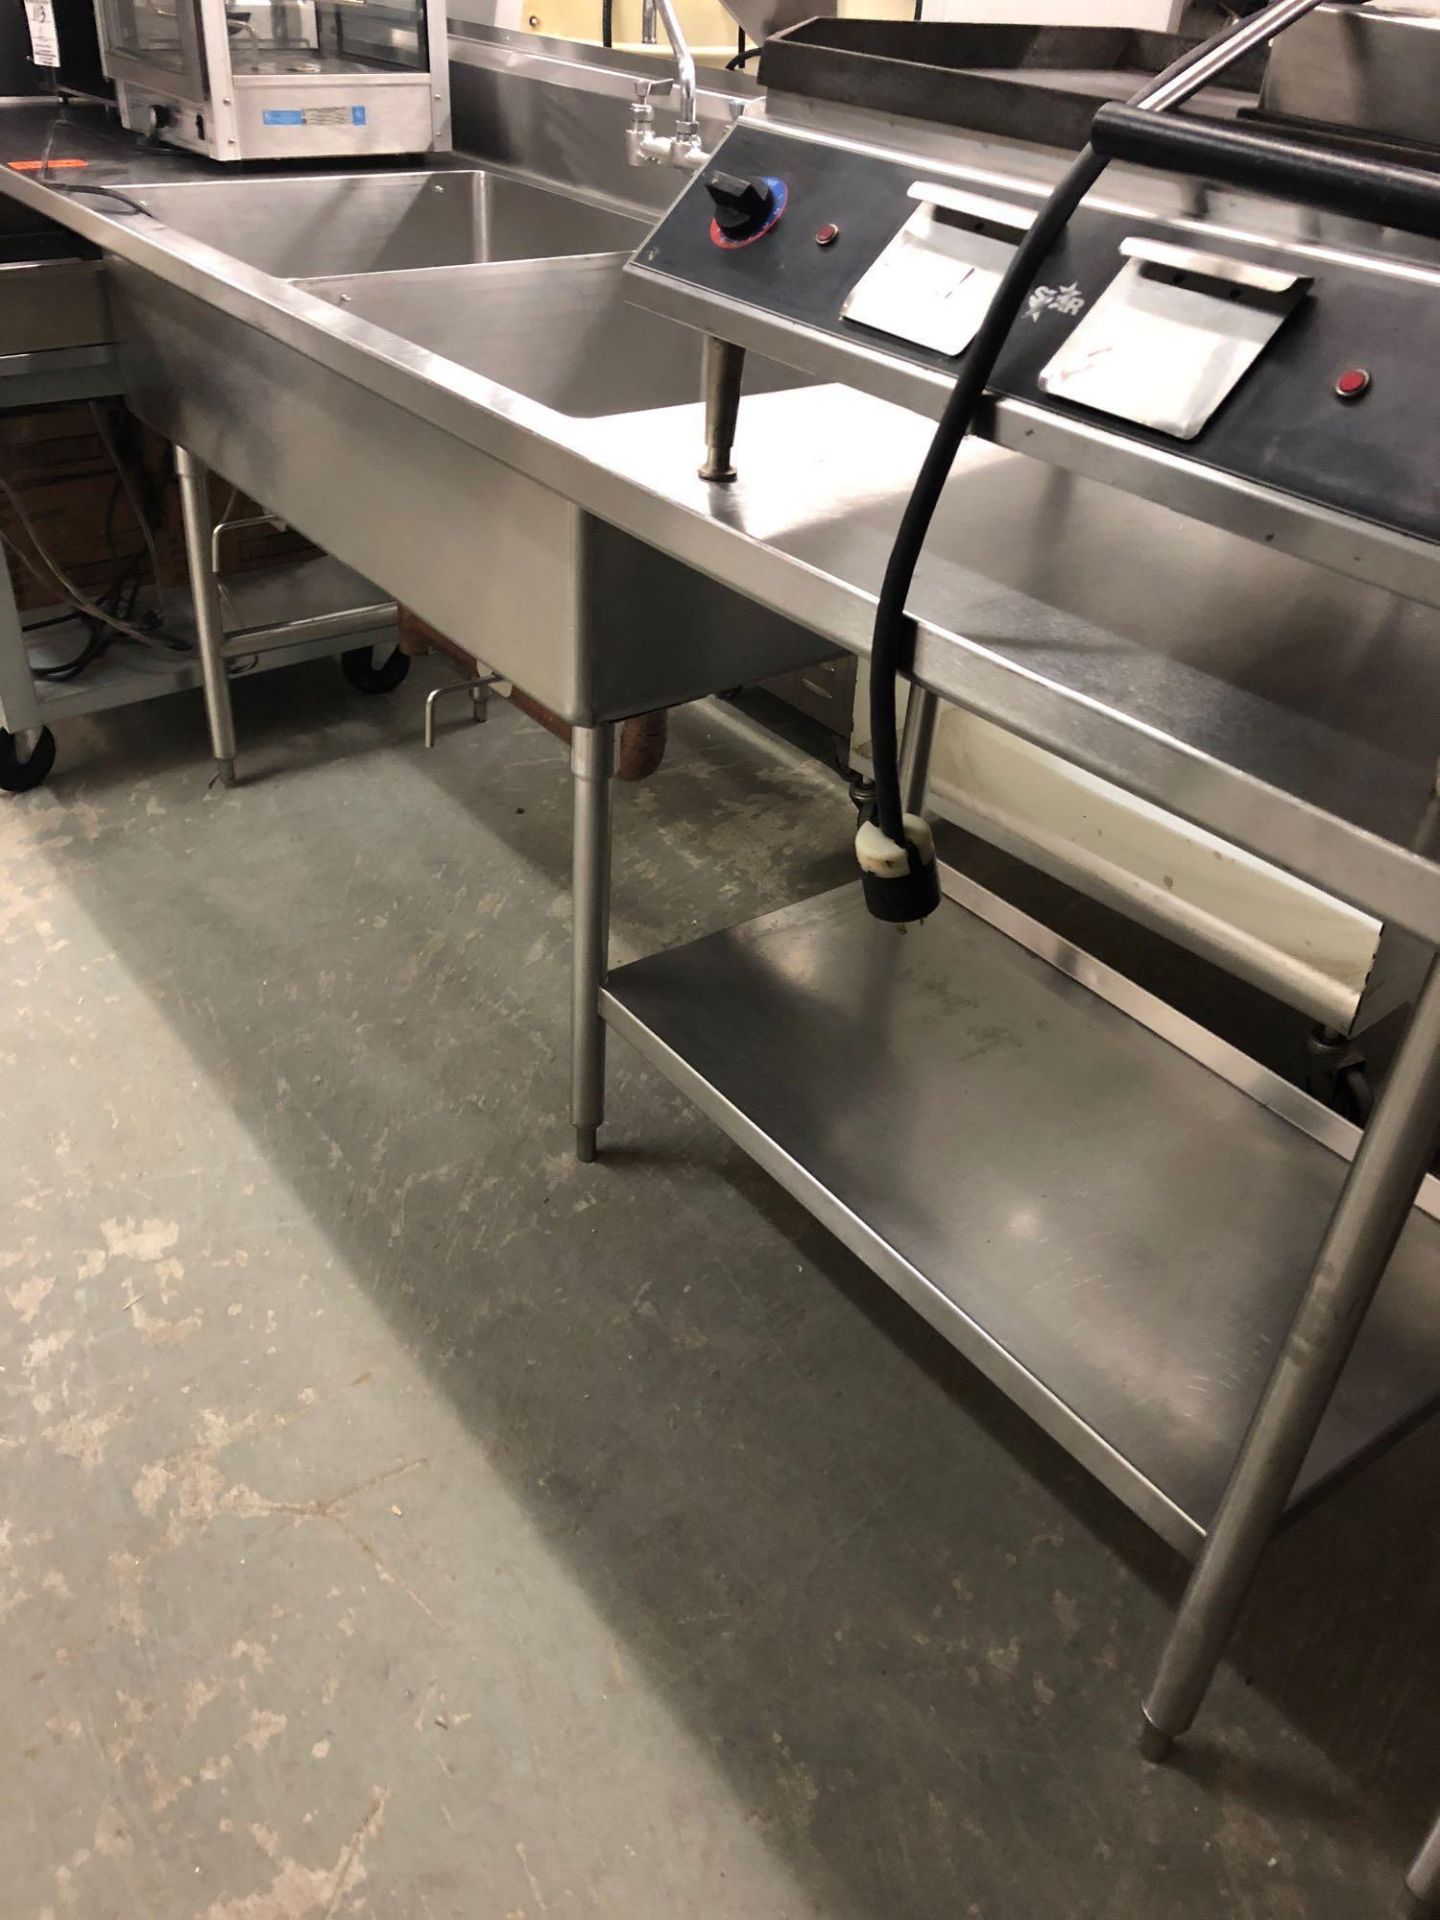 100” x 31” all stainless two compartment sink